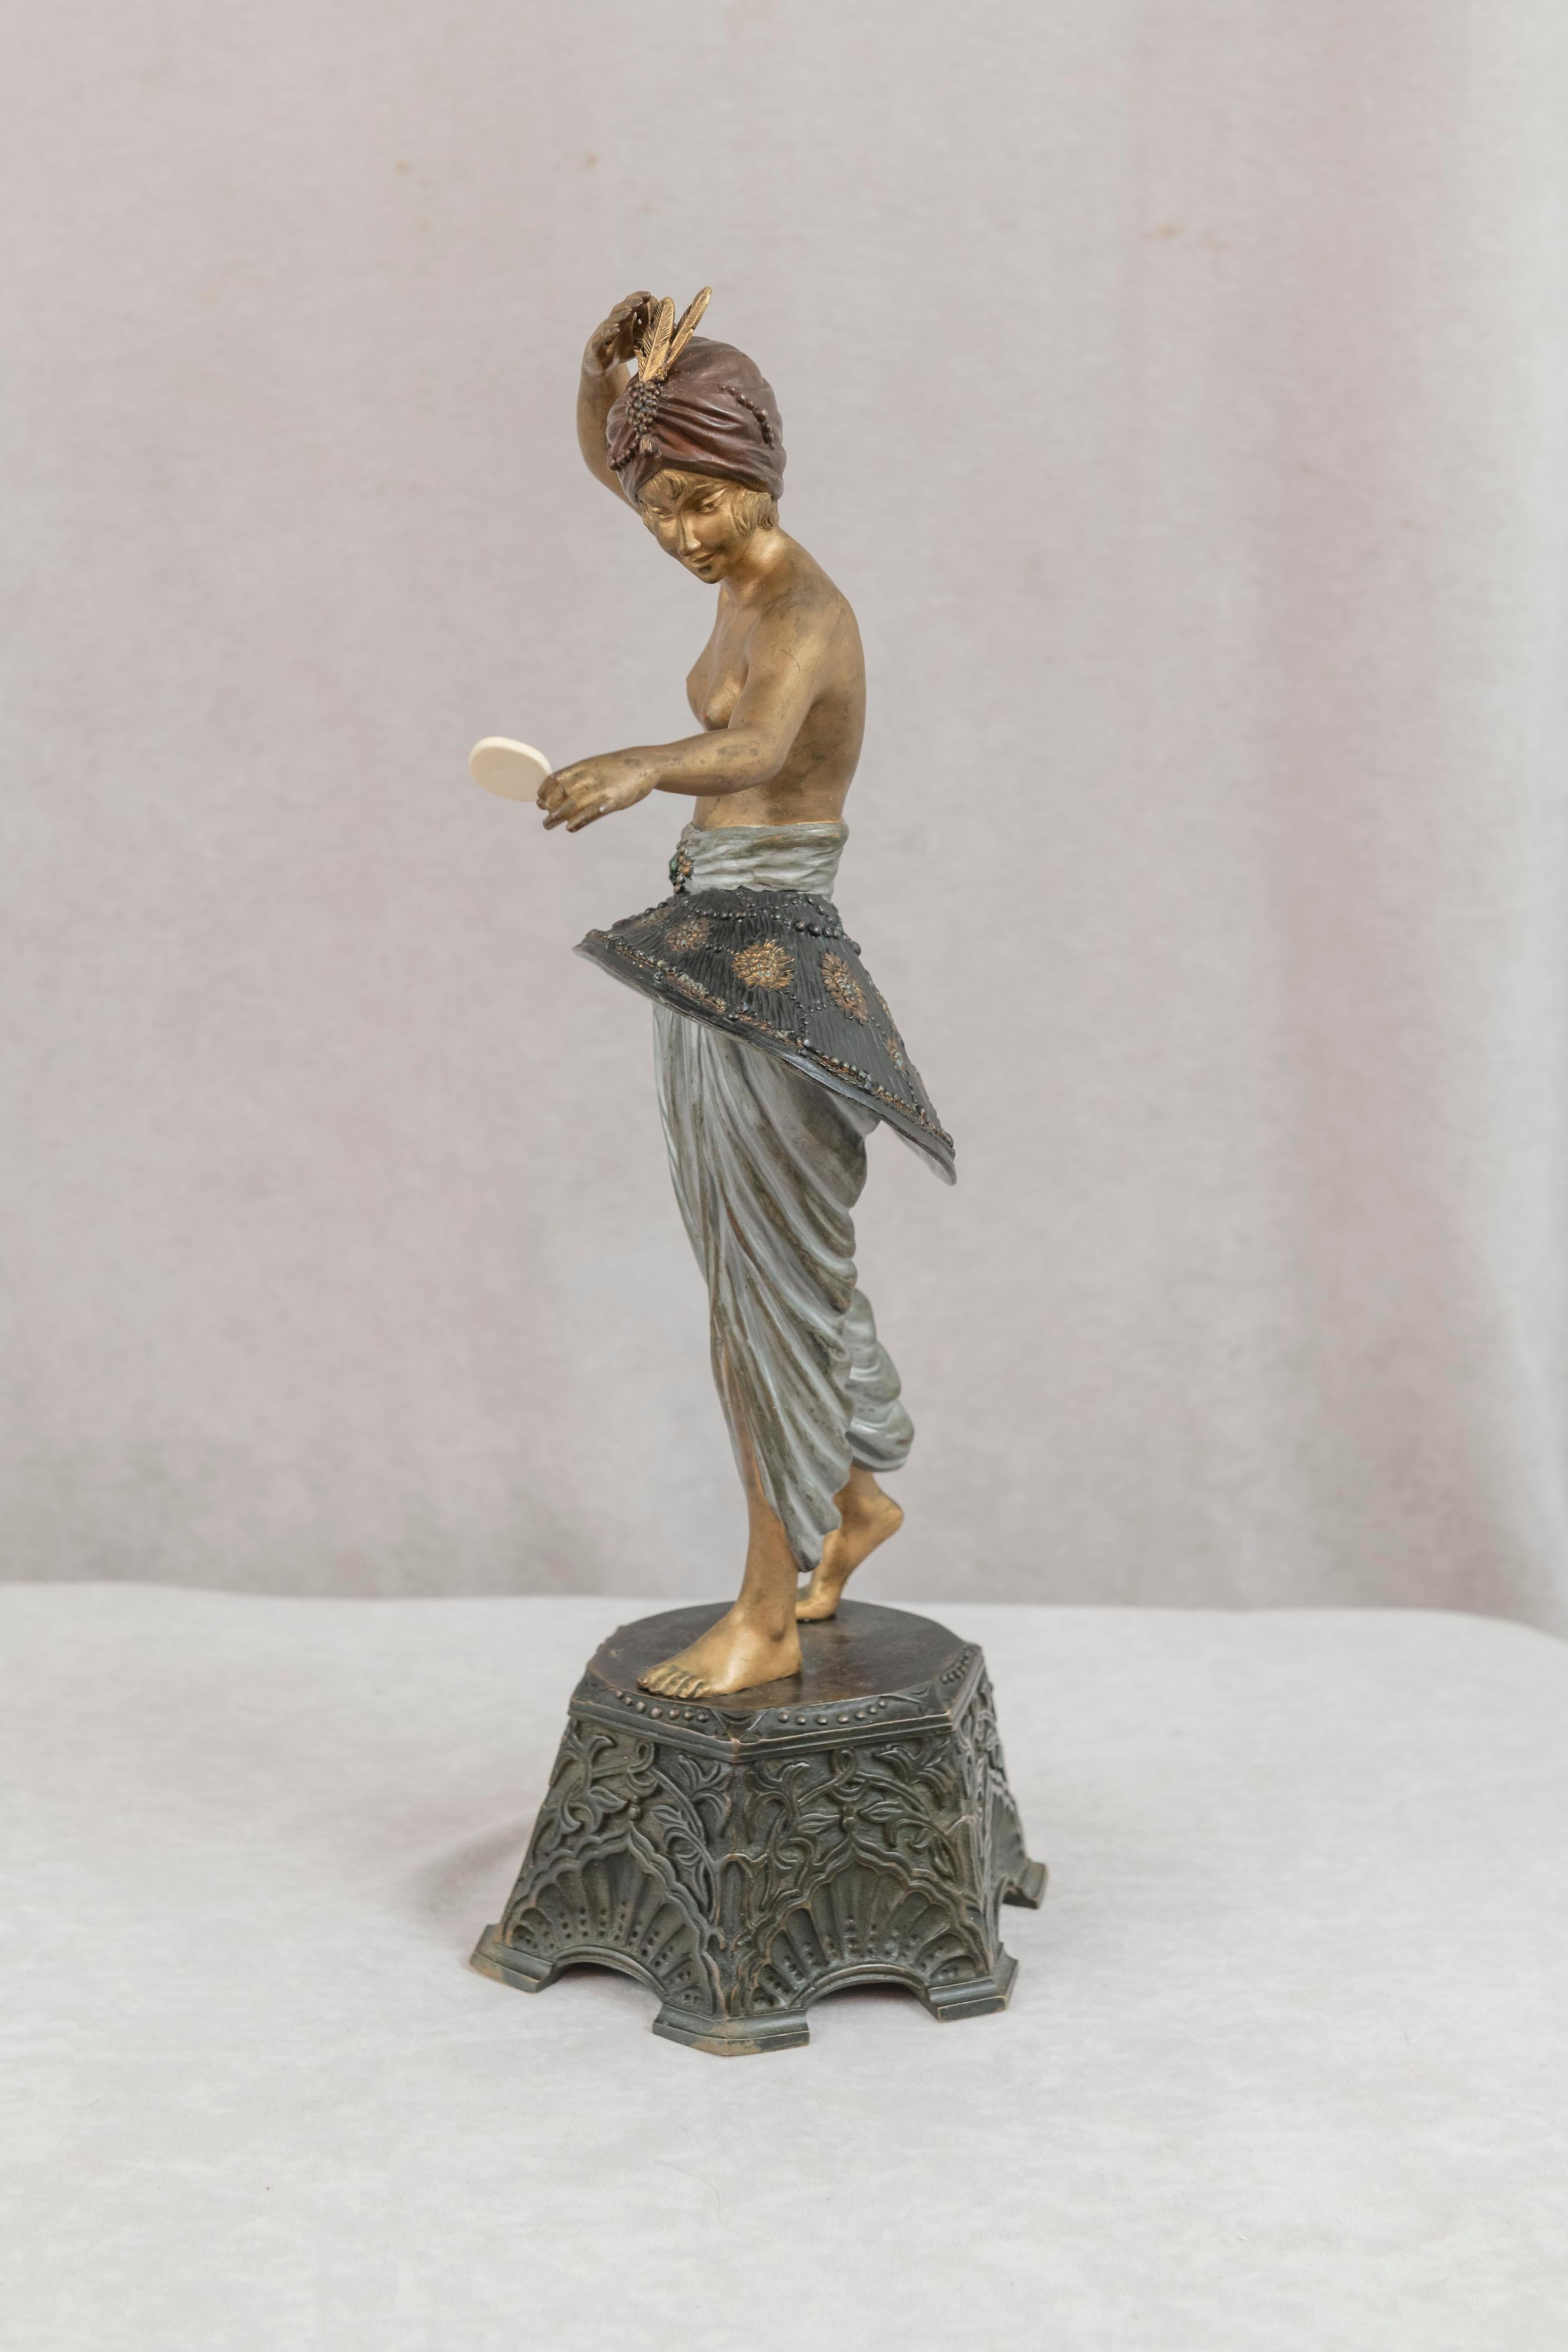 This very special large bronze was done by the highly respected artist of the Art Deco period, Pierre le Faguays (1892-1962). His works have always been some of the of the most sought after from the Art Deco era. The lusciously painted harem dancer